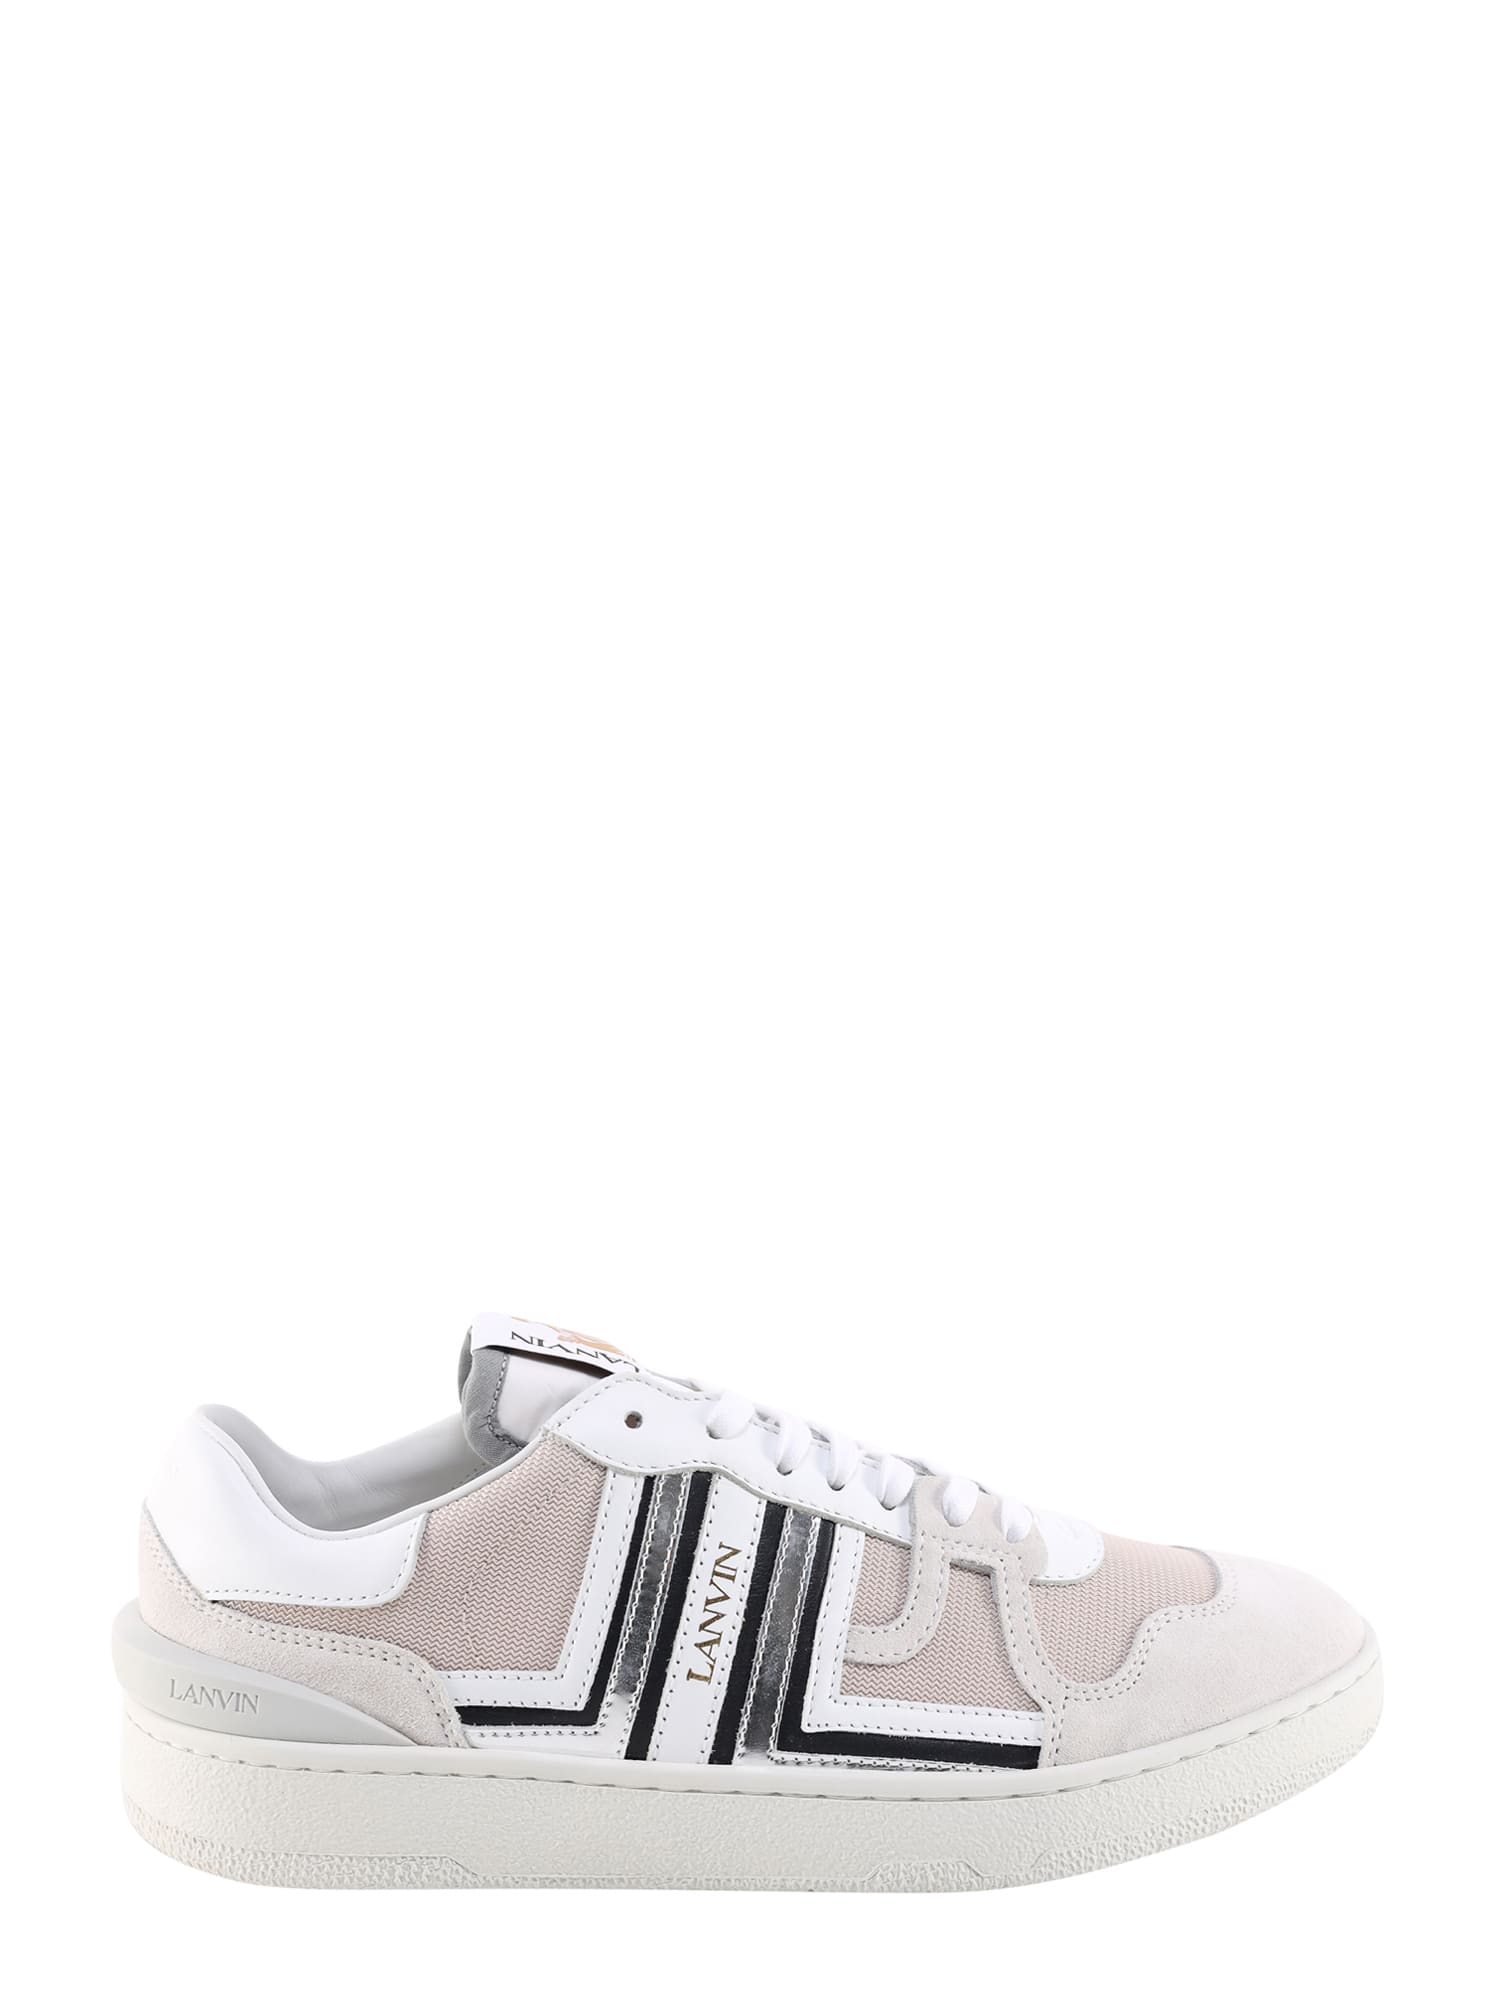 Lanvin Clay Low Sneakers